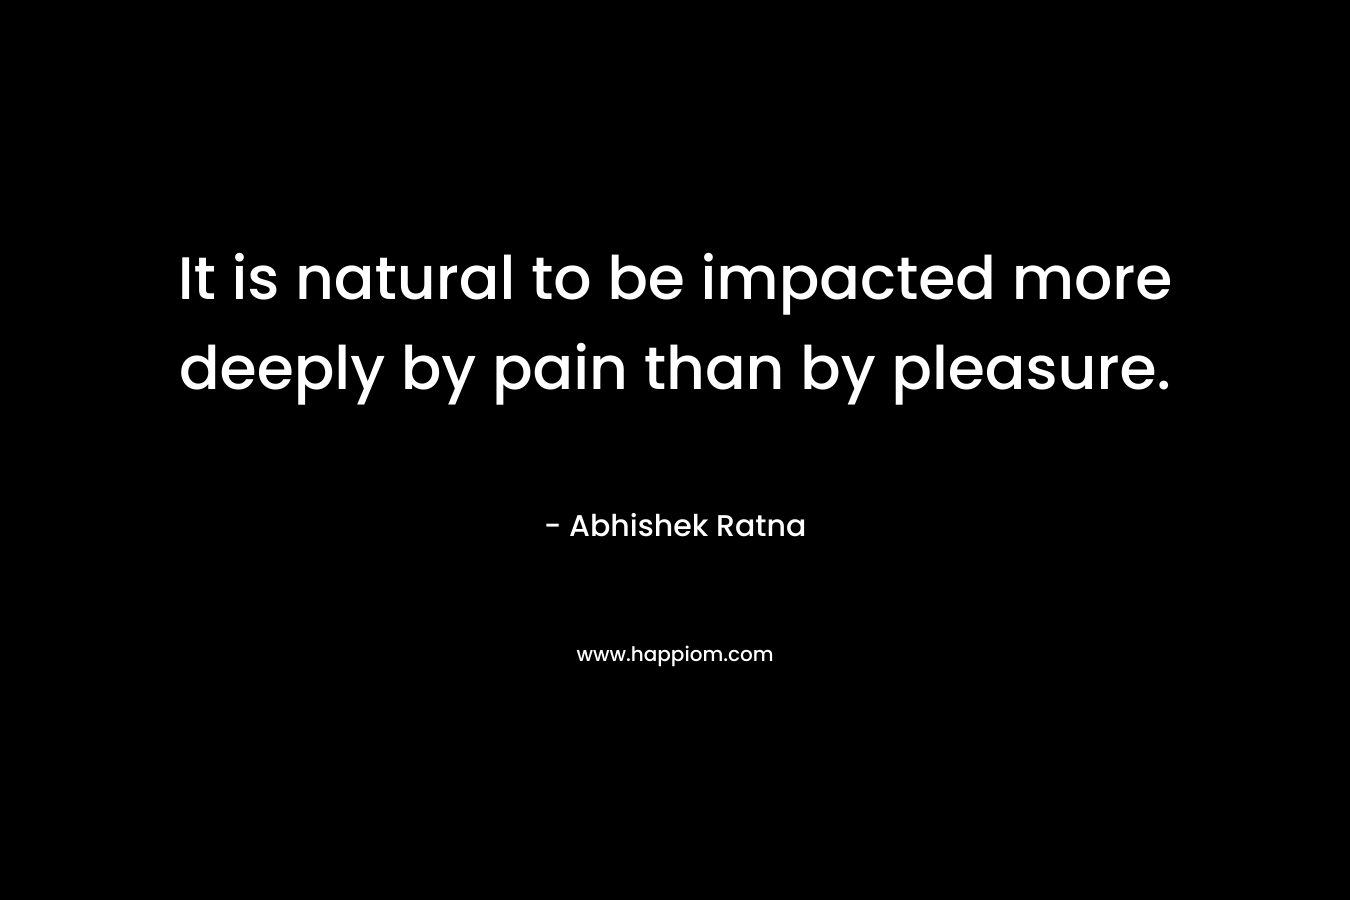 It is natural to be impacted more deeply by pain than by pleasure.